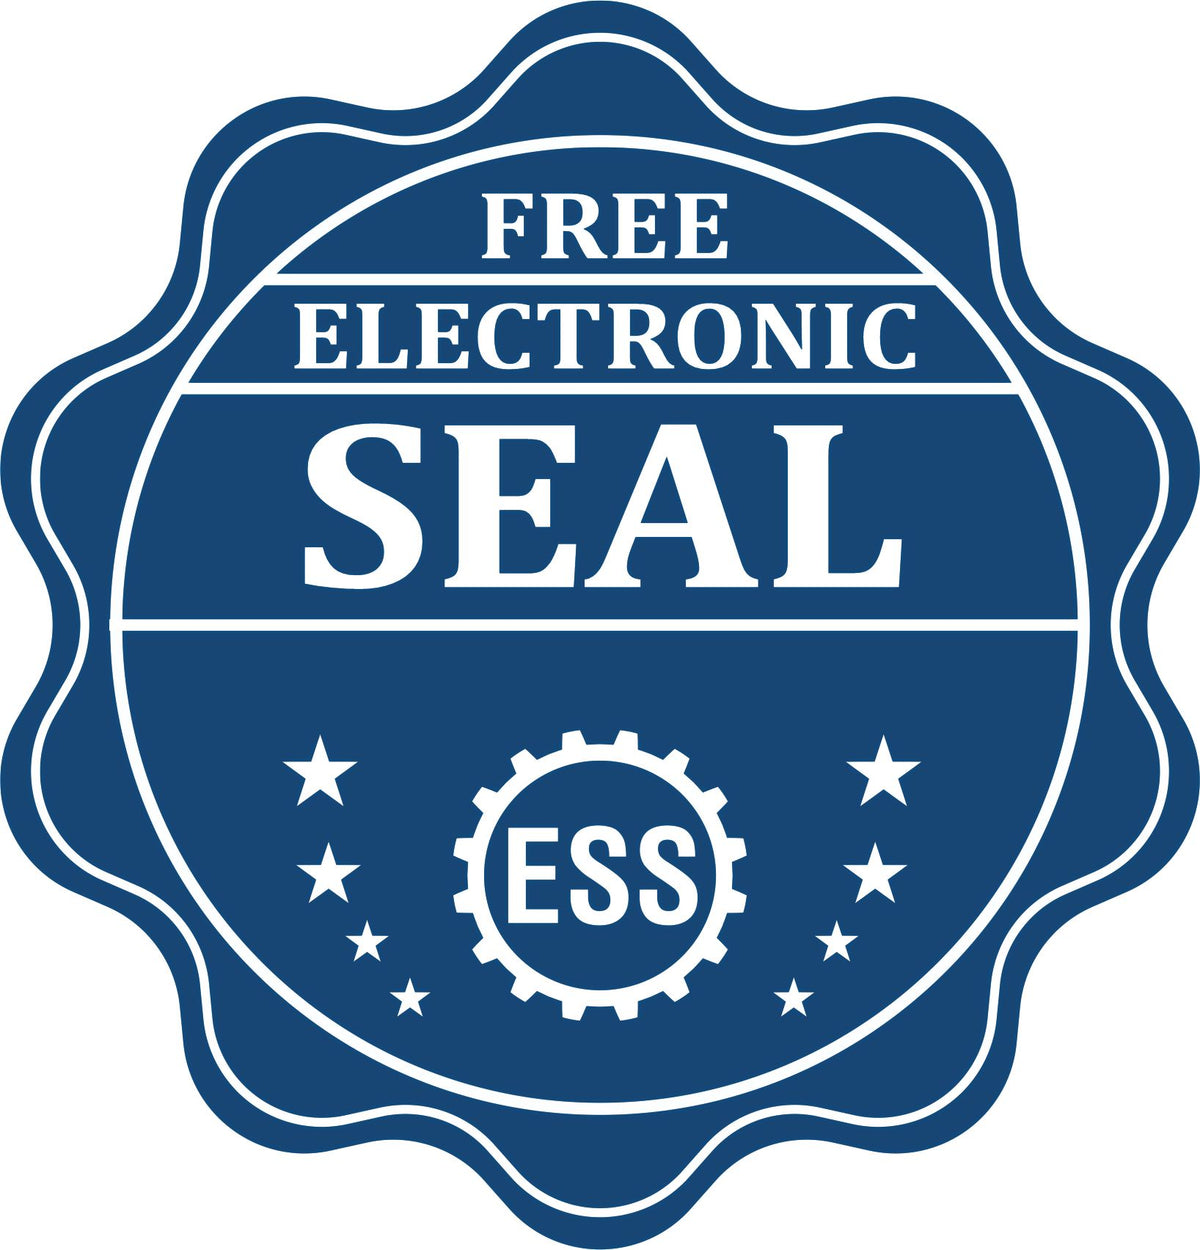 A badge showing a free electronic seal for the Slim Pre-Inked Texas Architect Seal Stamp with stars and the ESS gear on the emblem.